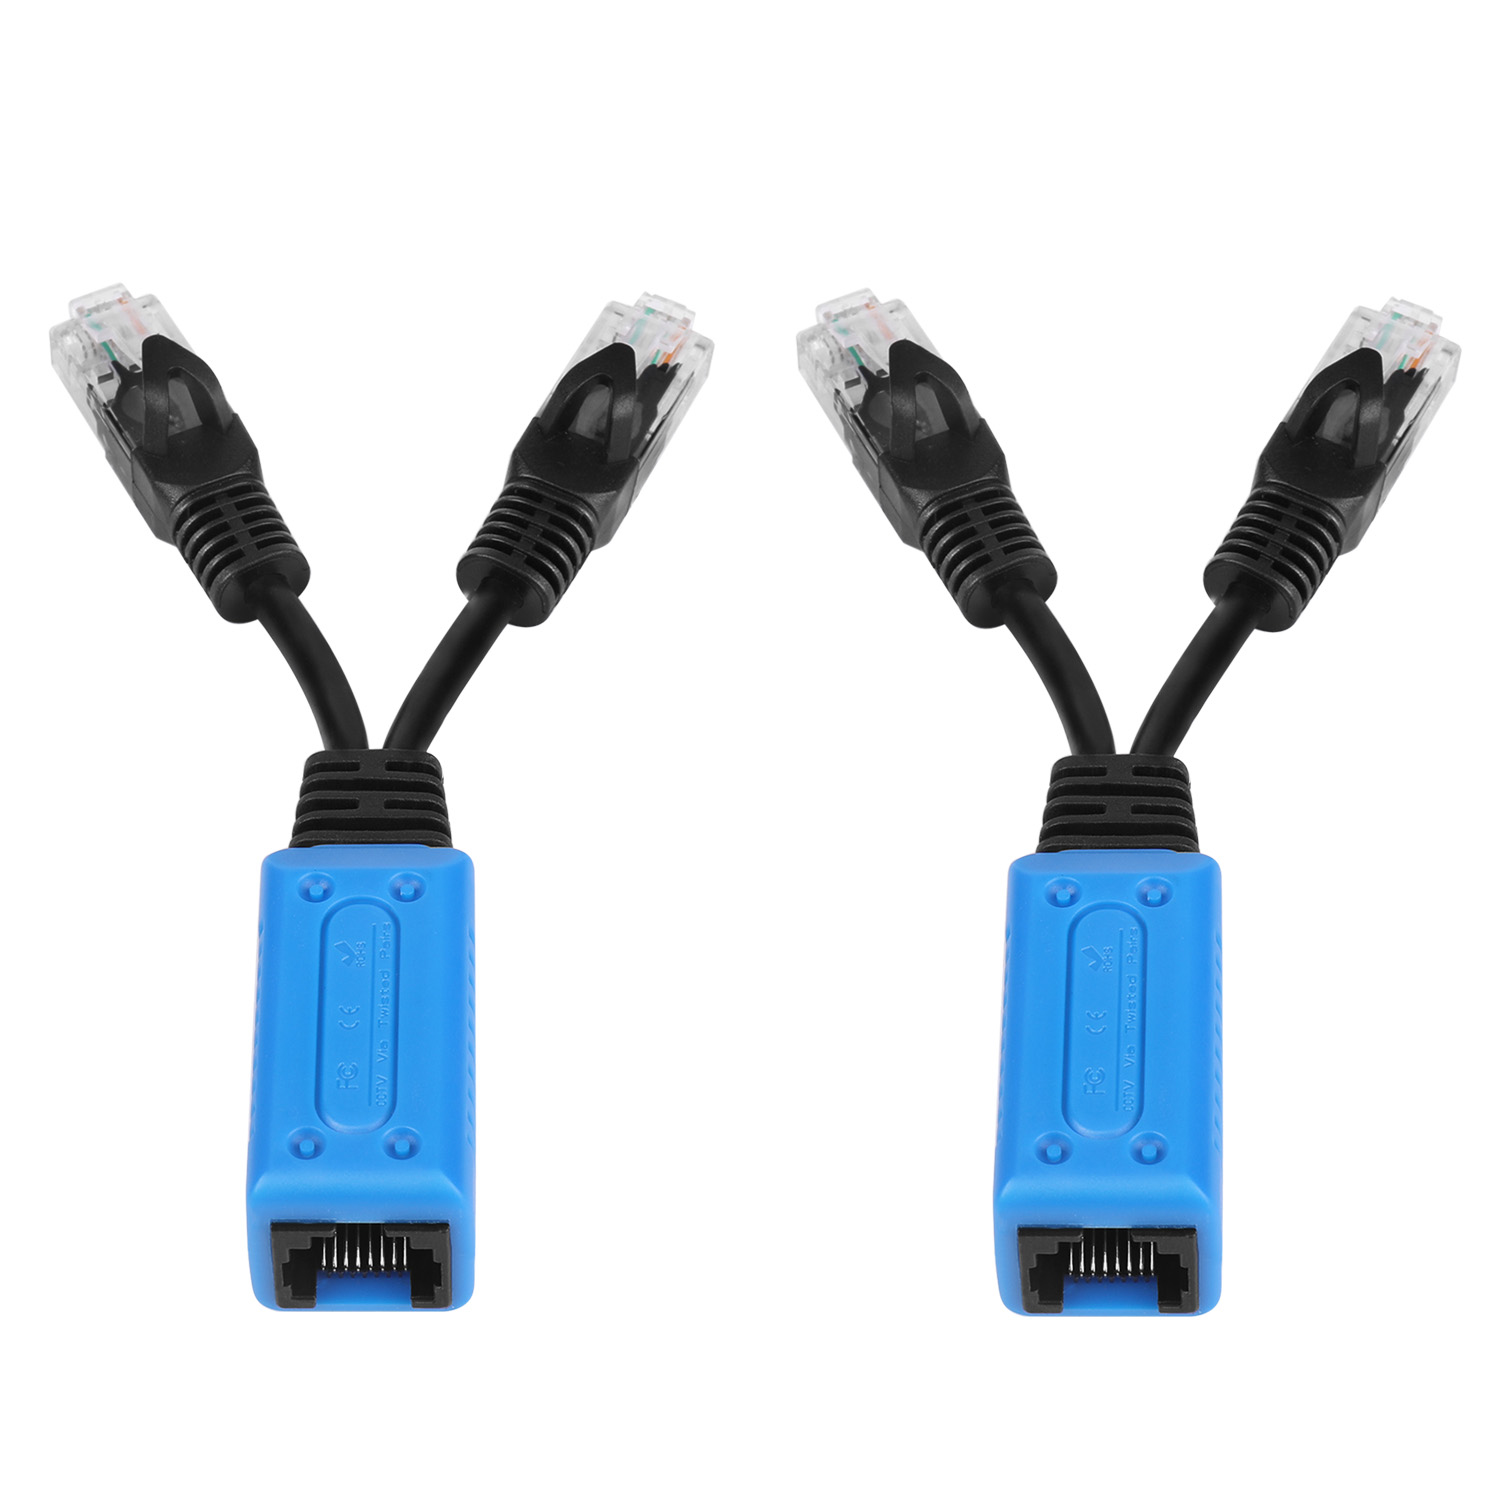 RJ45 Ethernet Cable Combiner / Splitter Kit (1 Pair) - 2 Male to 1 Female POE Data Adapter LAN Ethernet Network Extender Y Splitter Cat5 Cat5e Cat6 UPOE Cable for Surveillance Security Monitoring - image 3 of 7